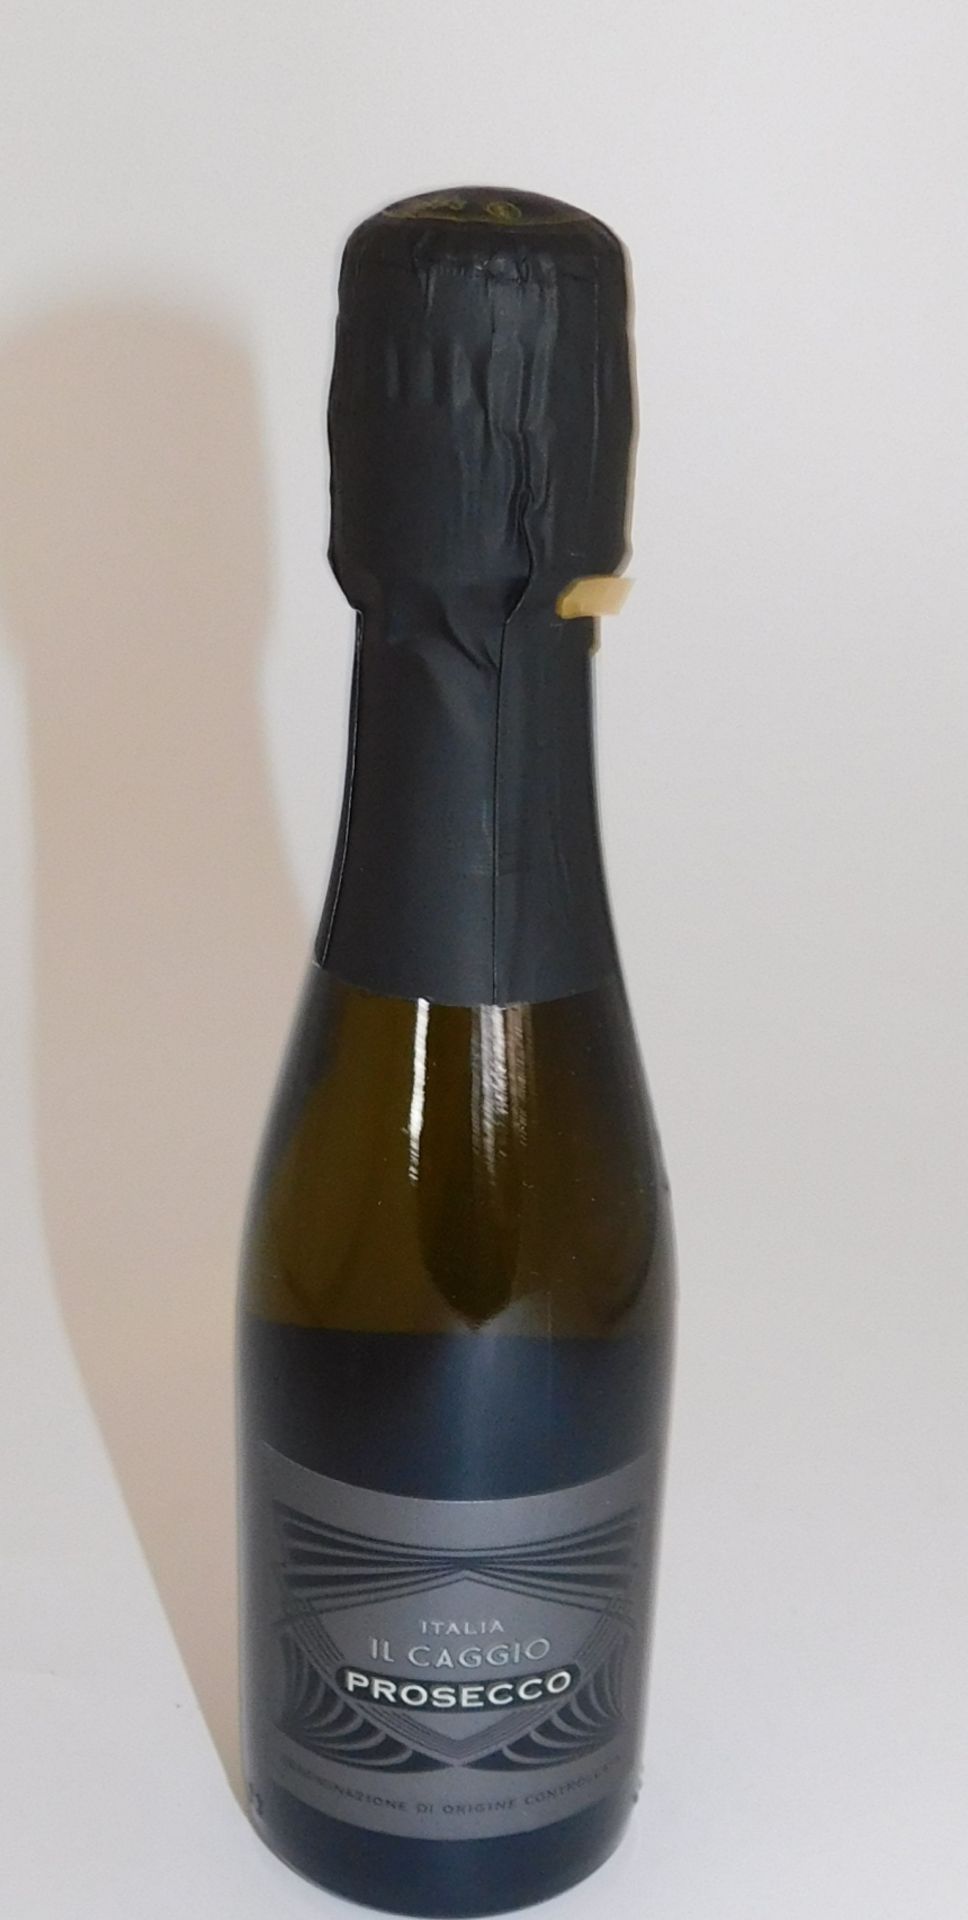 48 Bottles of Il Caggio Prosecco, 200ml (Located Stockport – See General Notes for More Details)